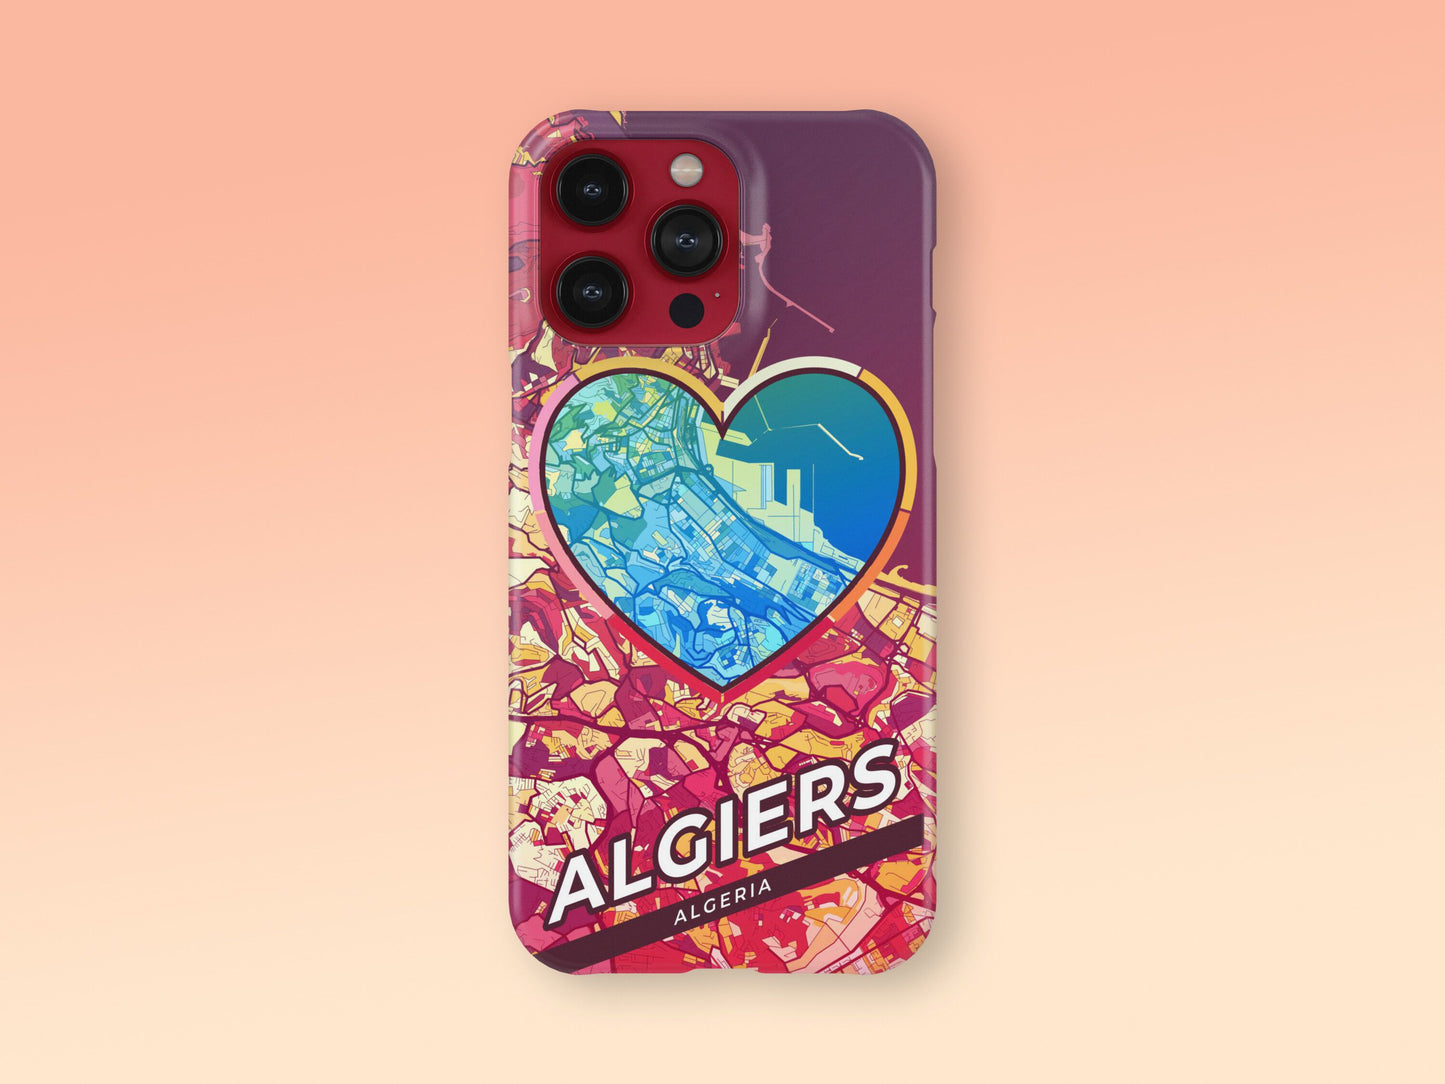 Algiers Algeria slim phone case with colorful icon. Birthday, wedding or housewarming gift. Couple match cases. 2